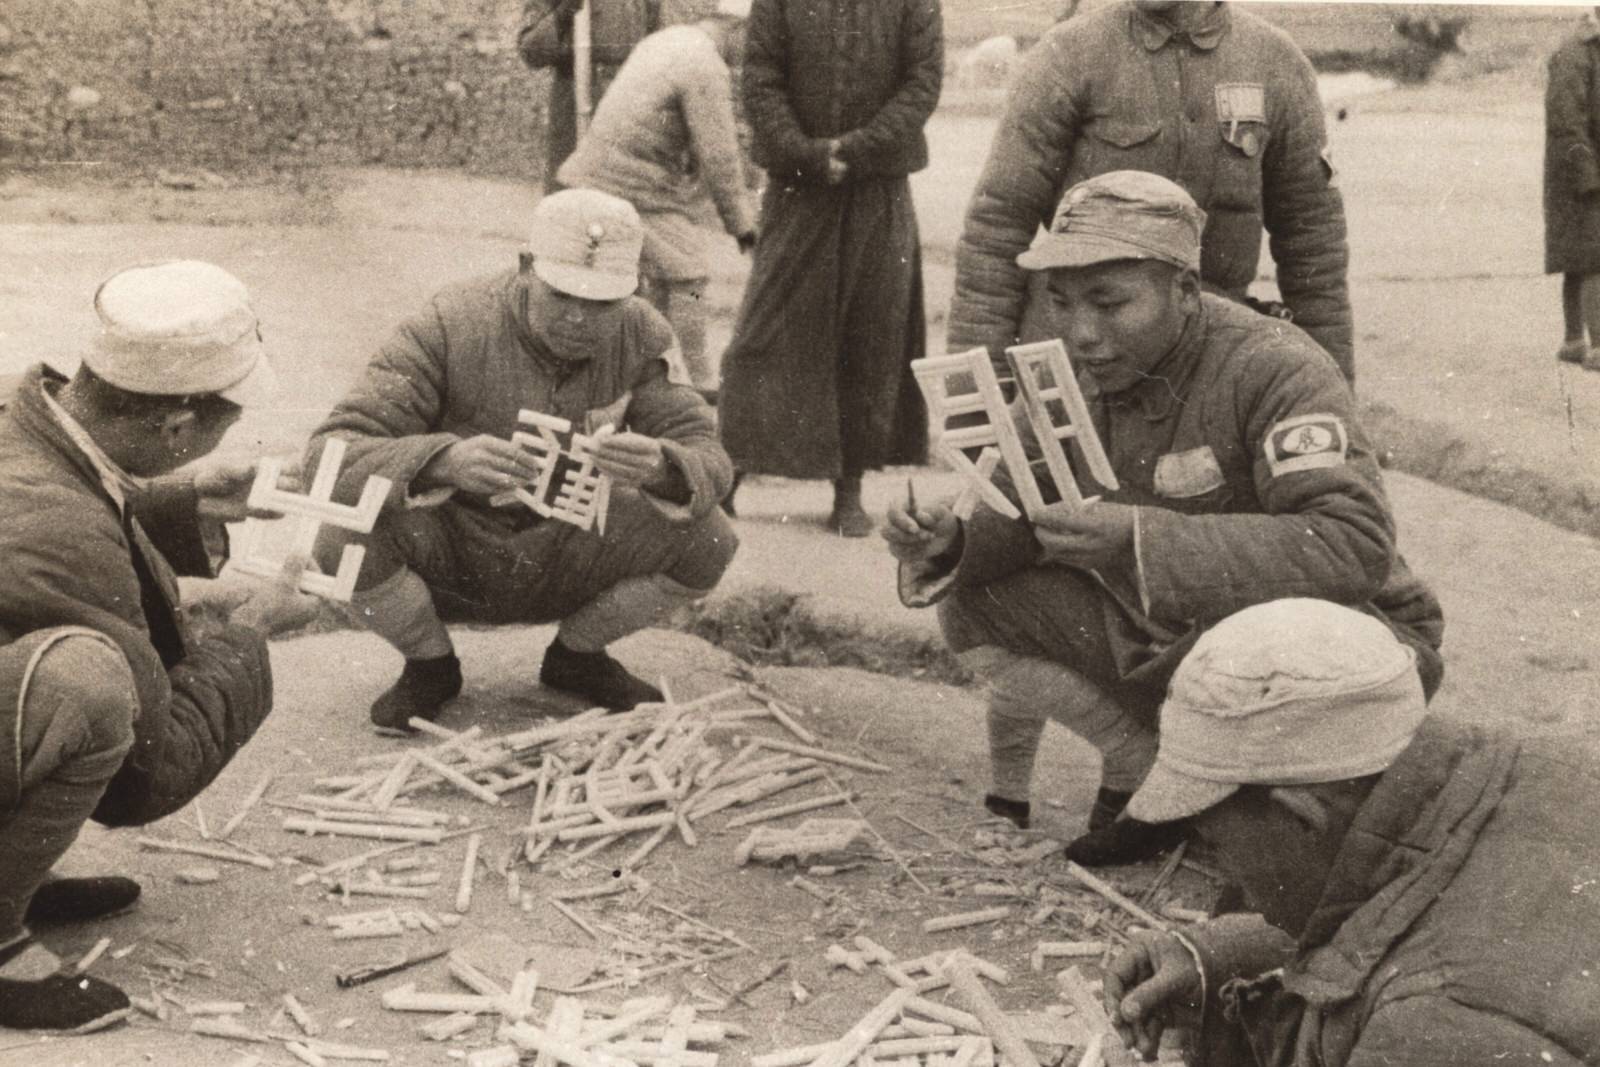 Chinese soldiers, taught reading and writing in the Army, carving Chinese words from bamboo and arranging them into anti-Japanese slogans across the walls of buildings and towns. 1937-1940